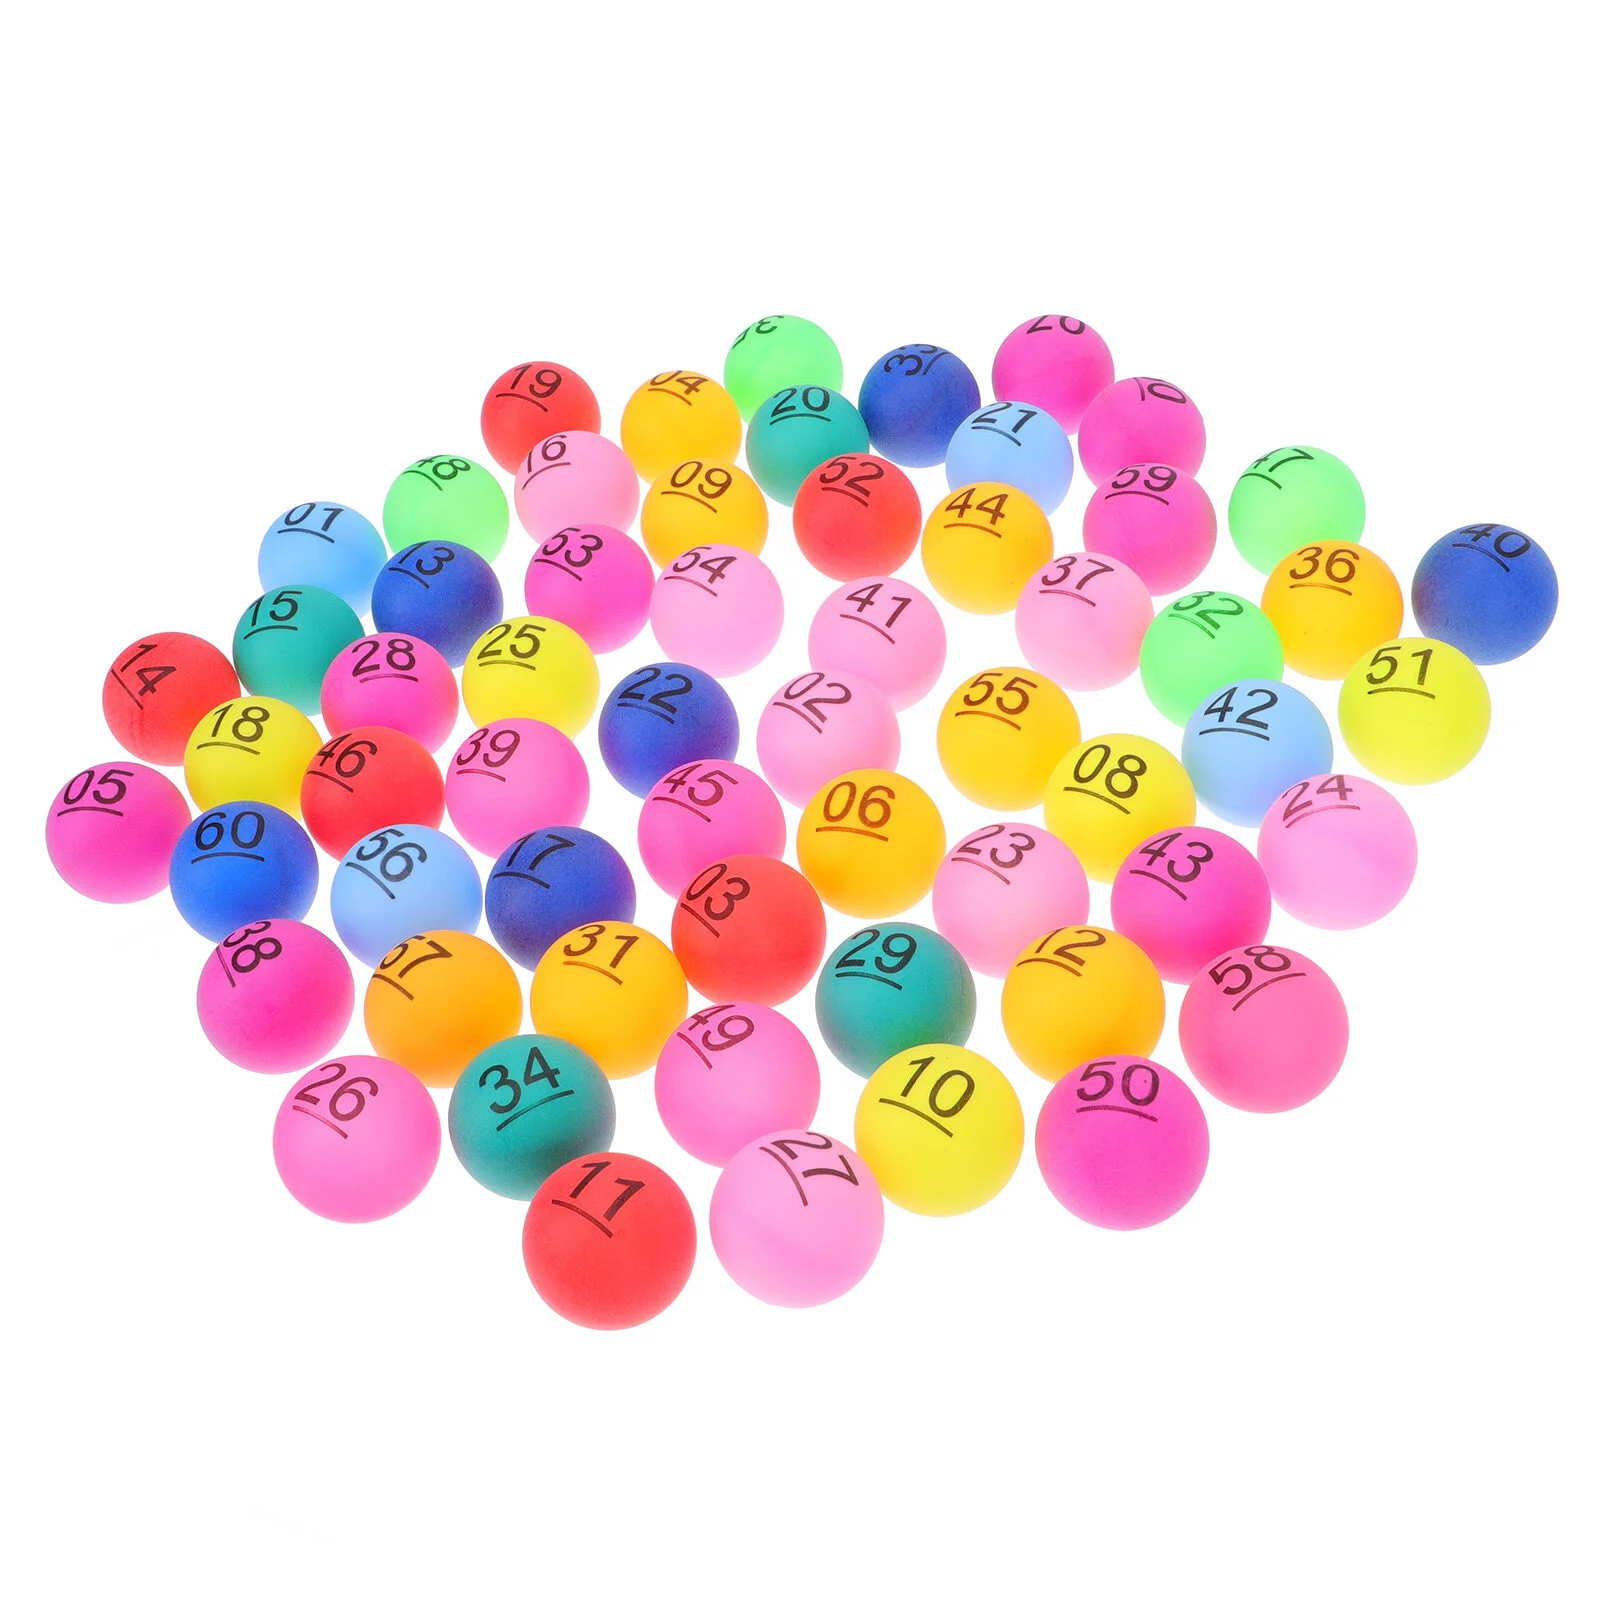 

60 PCS Beer Pong Balls Number Numbered Entertainment Bingo Seamless Game Pingpong Lottery Plastic Tennis